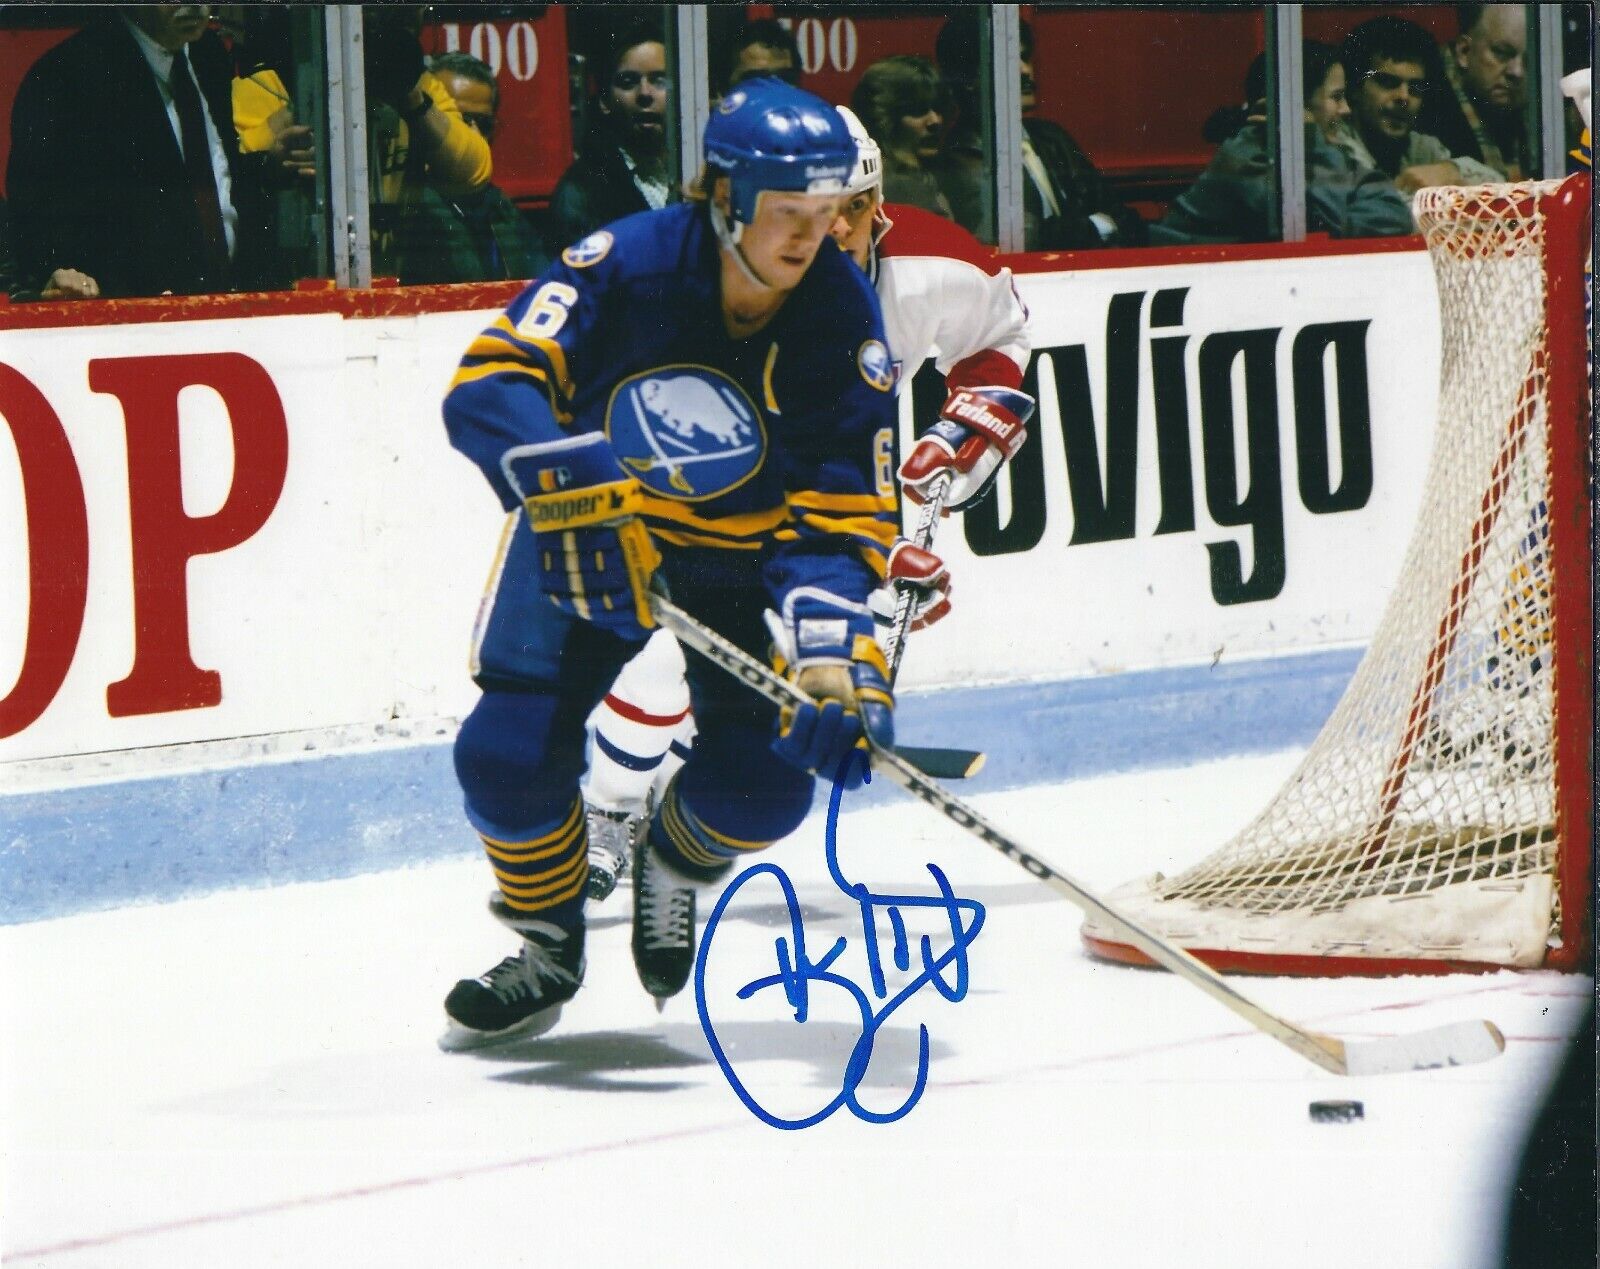 Signed 8x10 PHIL HOUSLEY Buffalo Sabres Autographed Photo Poster painting - COA